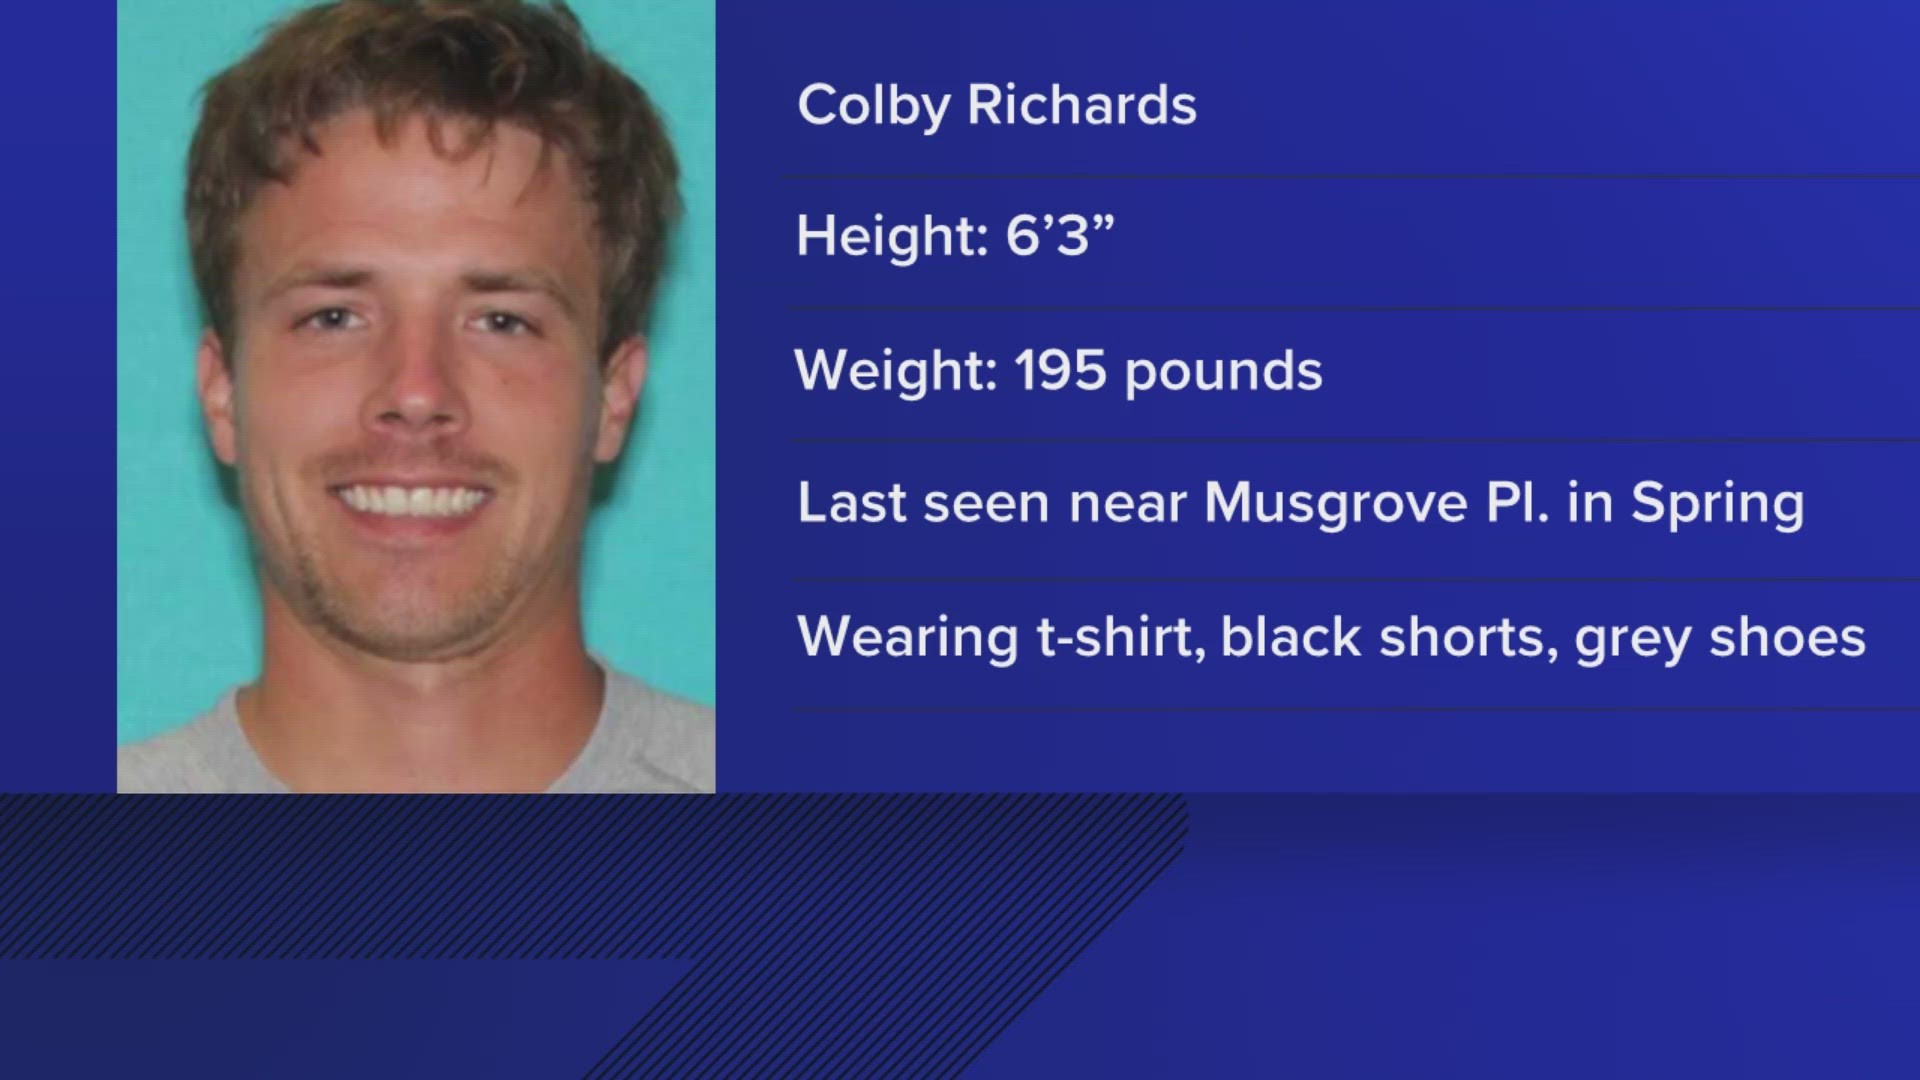 Colby Richards was last seen on Musgrove Place in Spring.  If you've seen him, you're asked to call the Montgomery County Sheriff's Office.